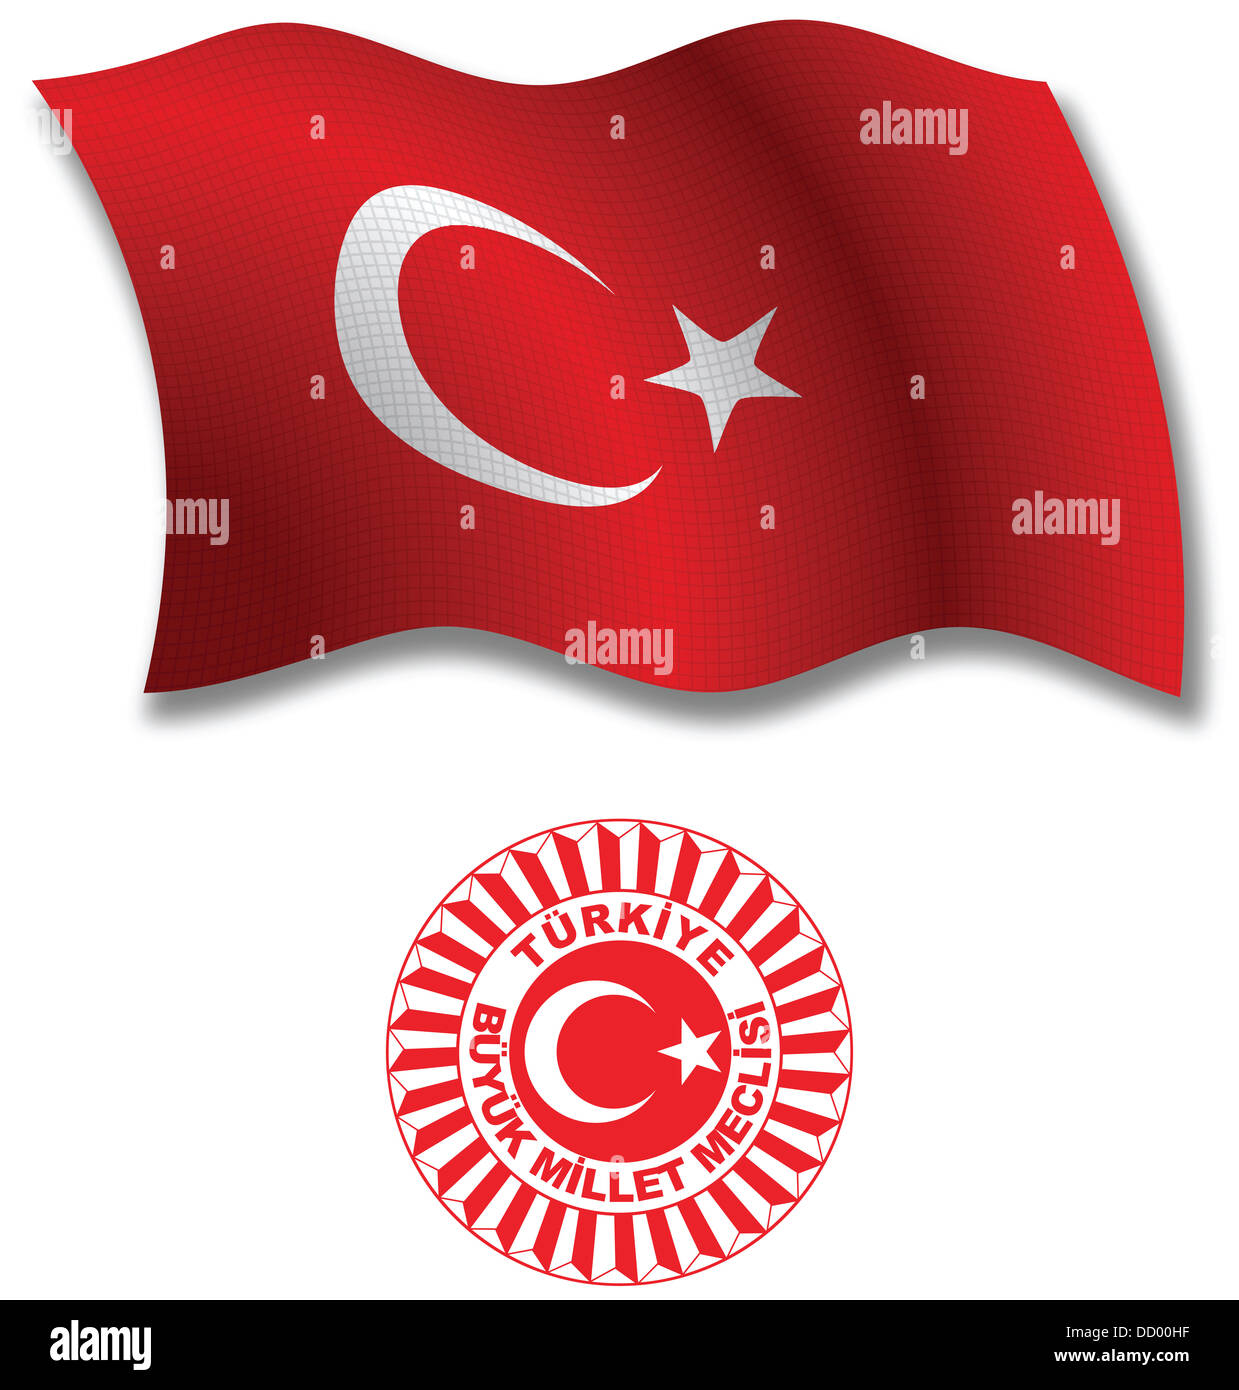 turkey shadowed textured wavy flag and coat of arms against white background, vector art illustration Stock Photo